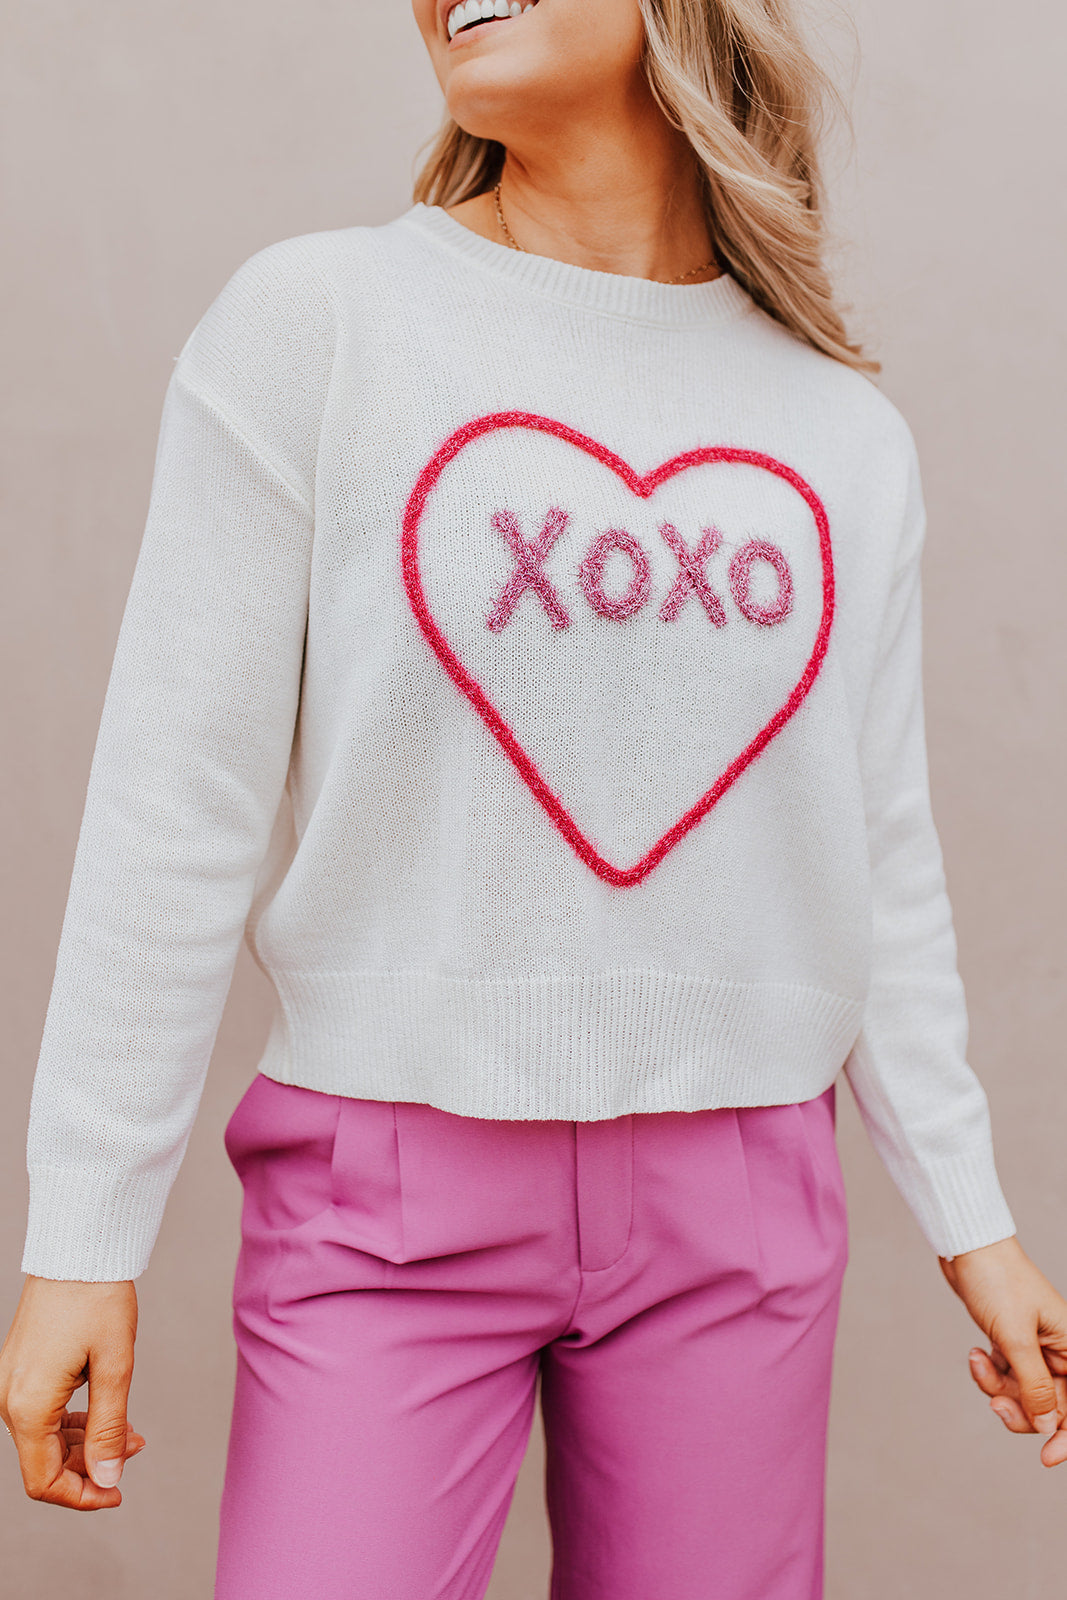 THE XOXO METALLIC EMBROIDERED SWEATER IN IVORY